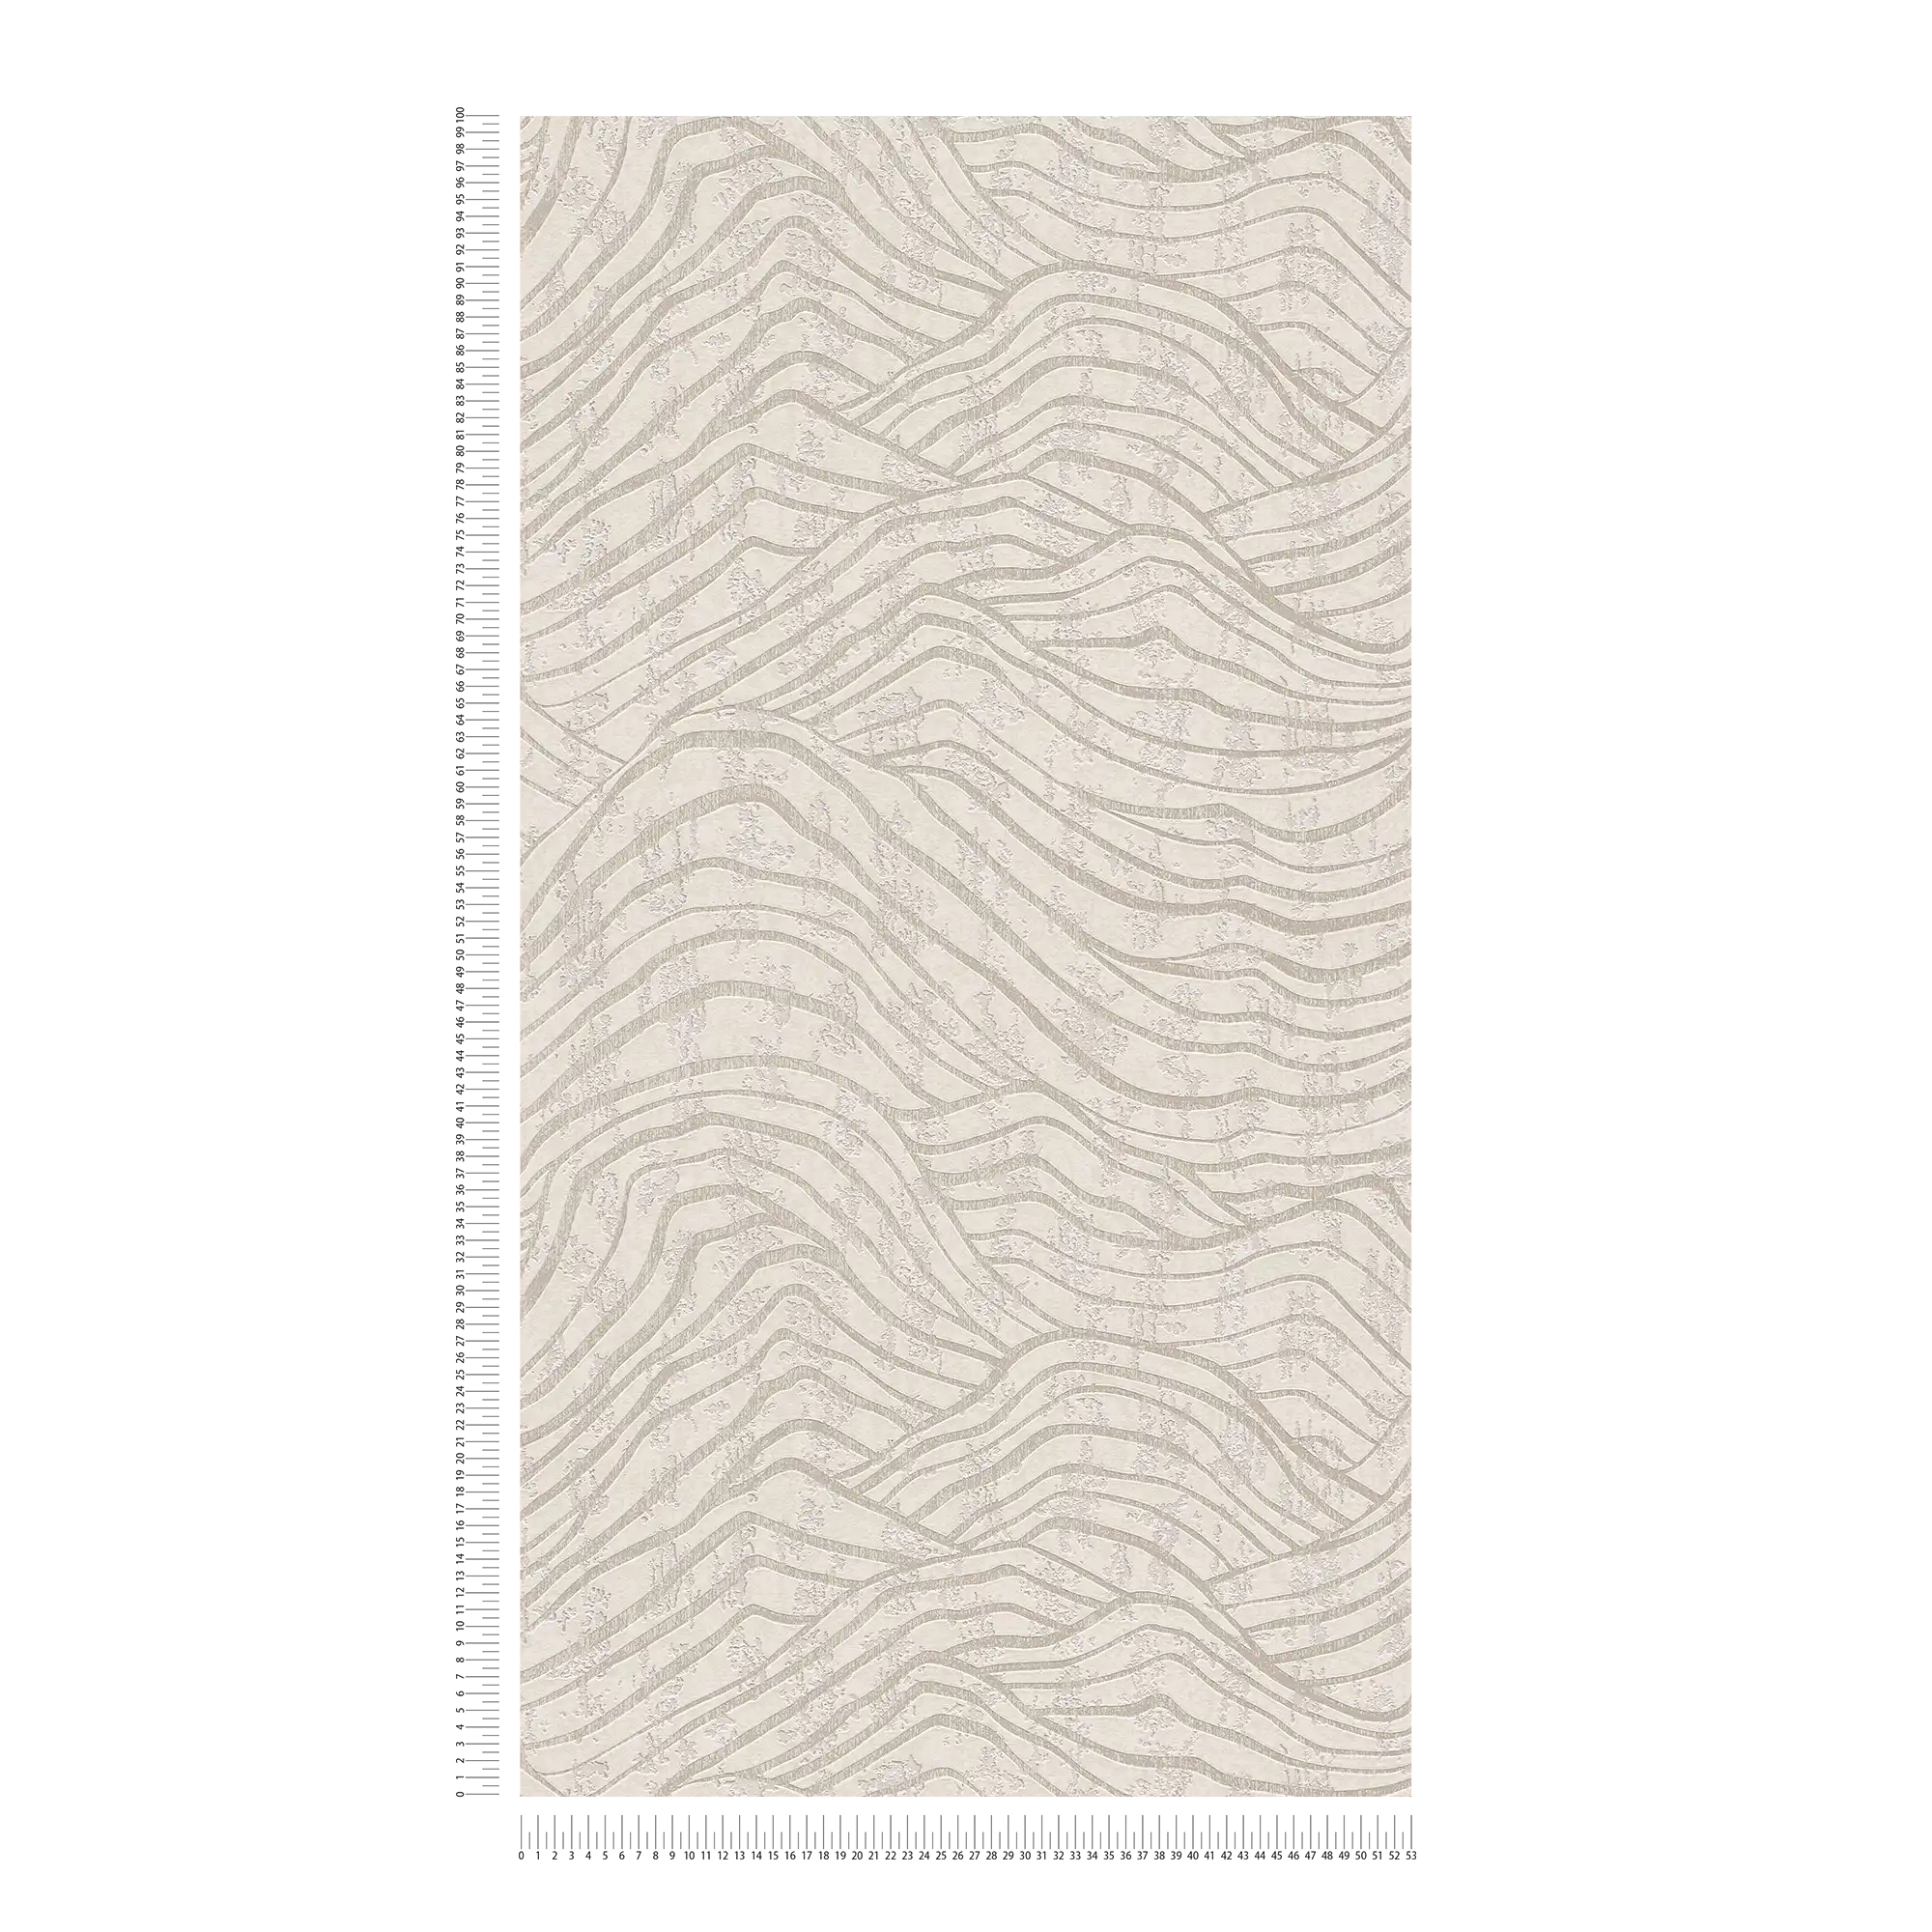             Abstract wallpaper with hill pattern in soft colours - white, silver
        